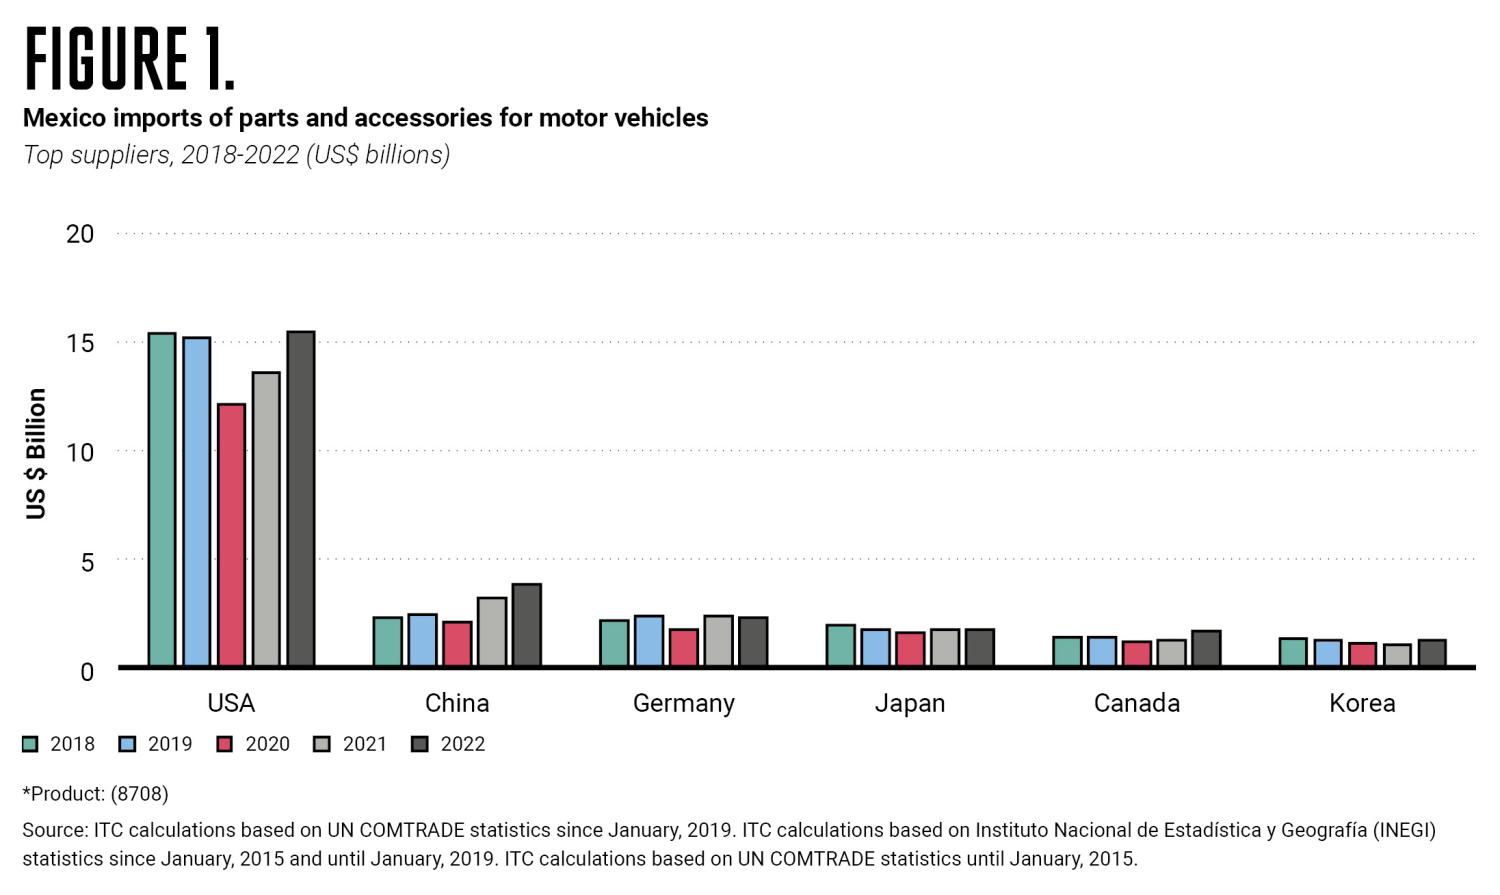 Mexico imports of parts and accessories for motor vehicles